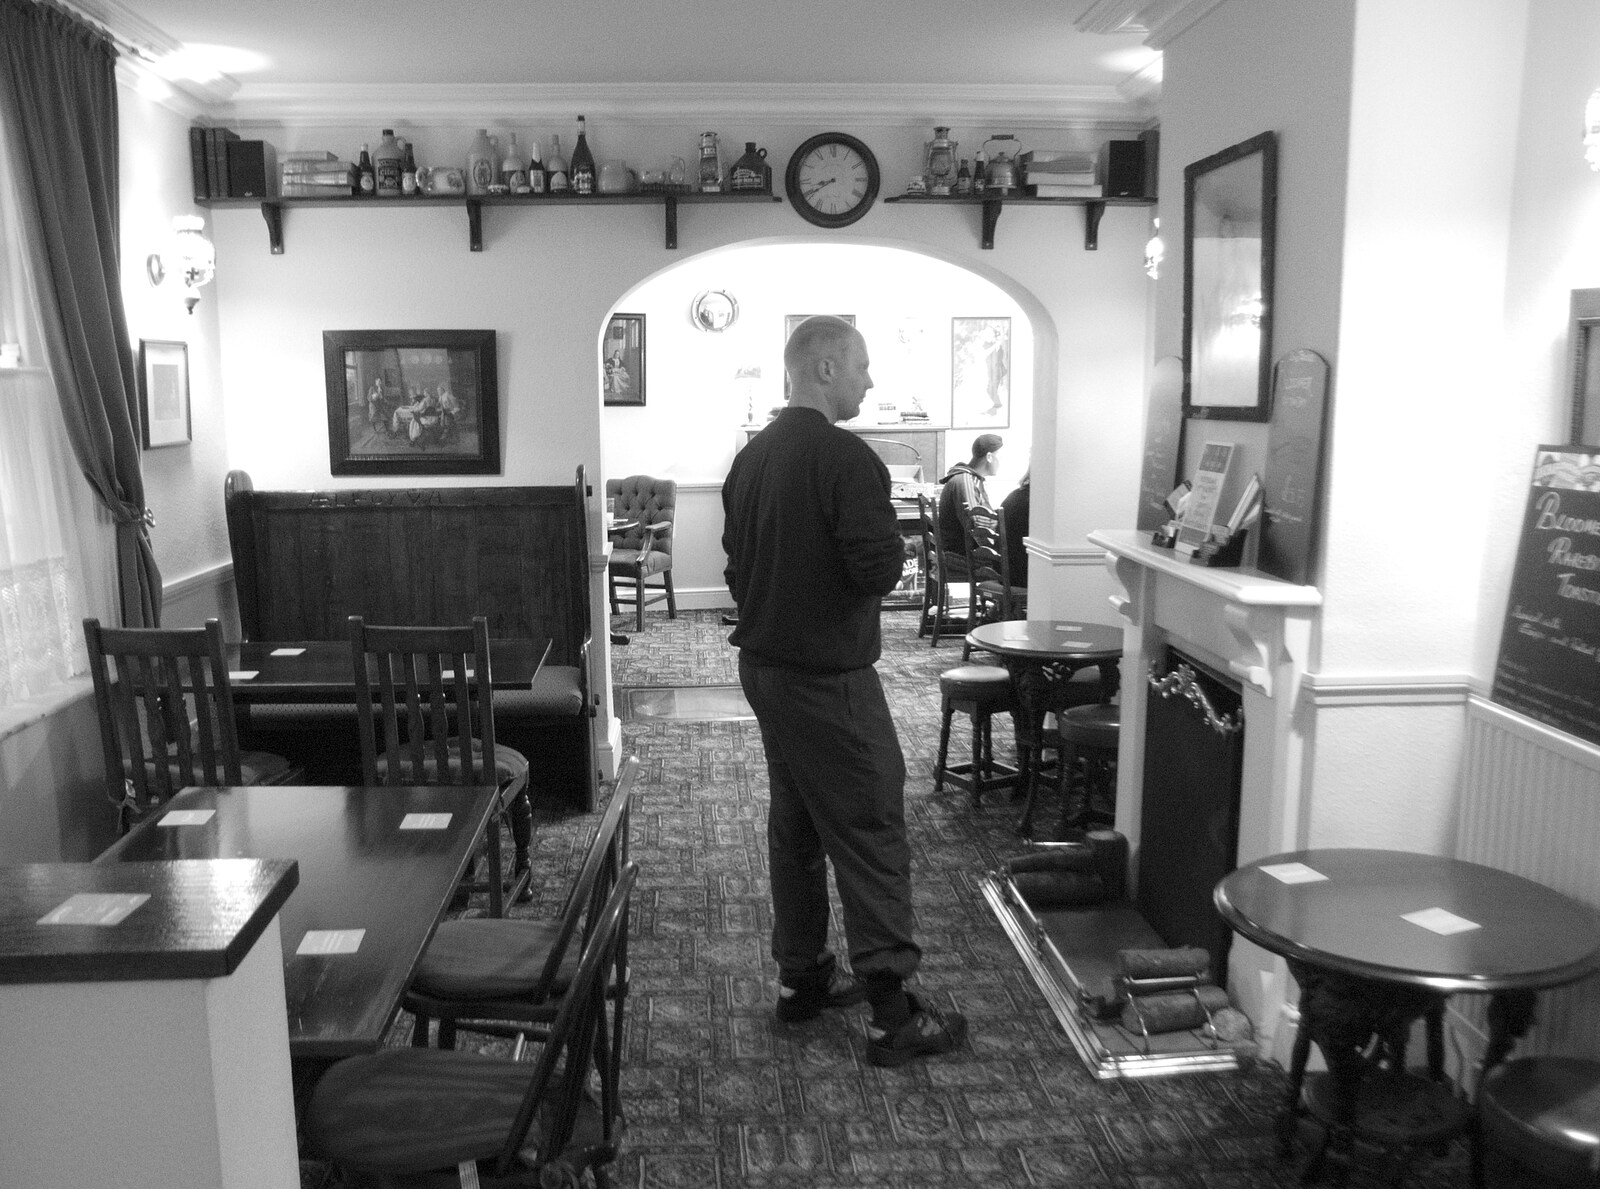 Paul in the Six Bells, Gislingham from Campfires, Oaksmere Building and a BSCC Bike Ride, Brome, Suffolk - 4th May 2017